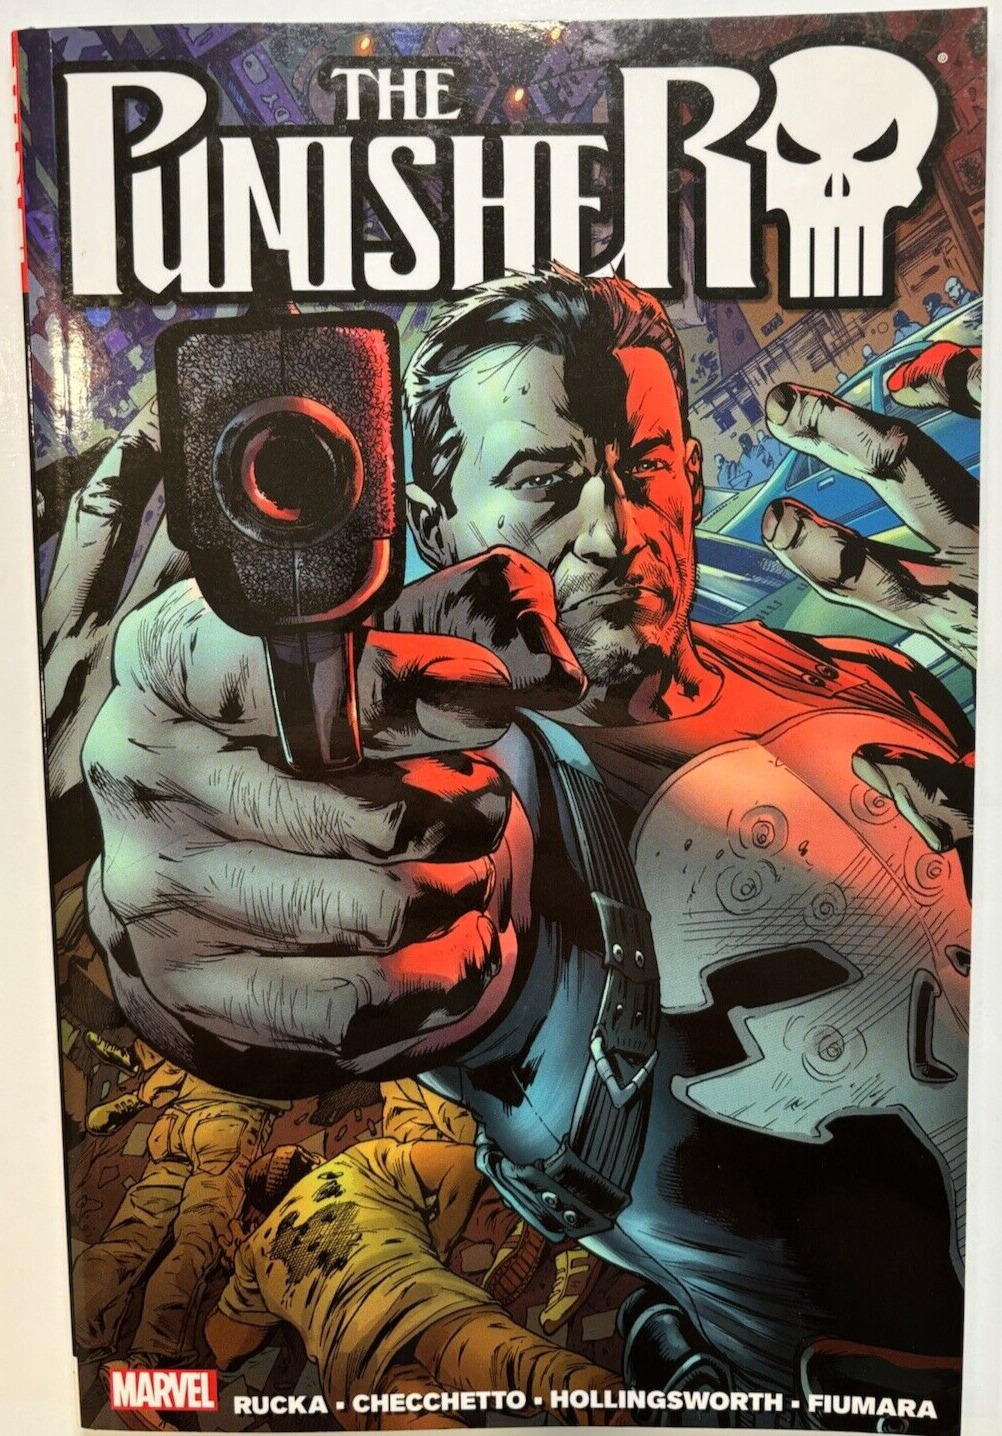 The Punisher by Greg Rucka #1 (Marvel Comics) TPB